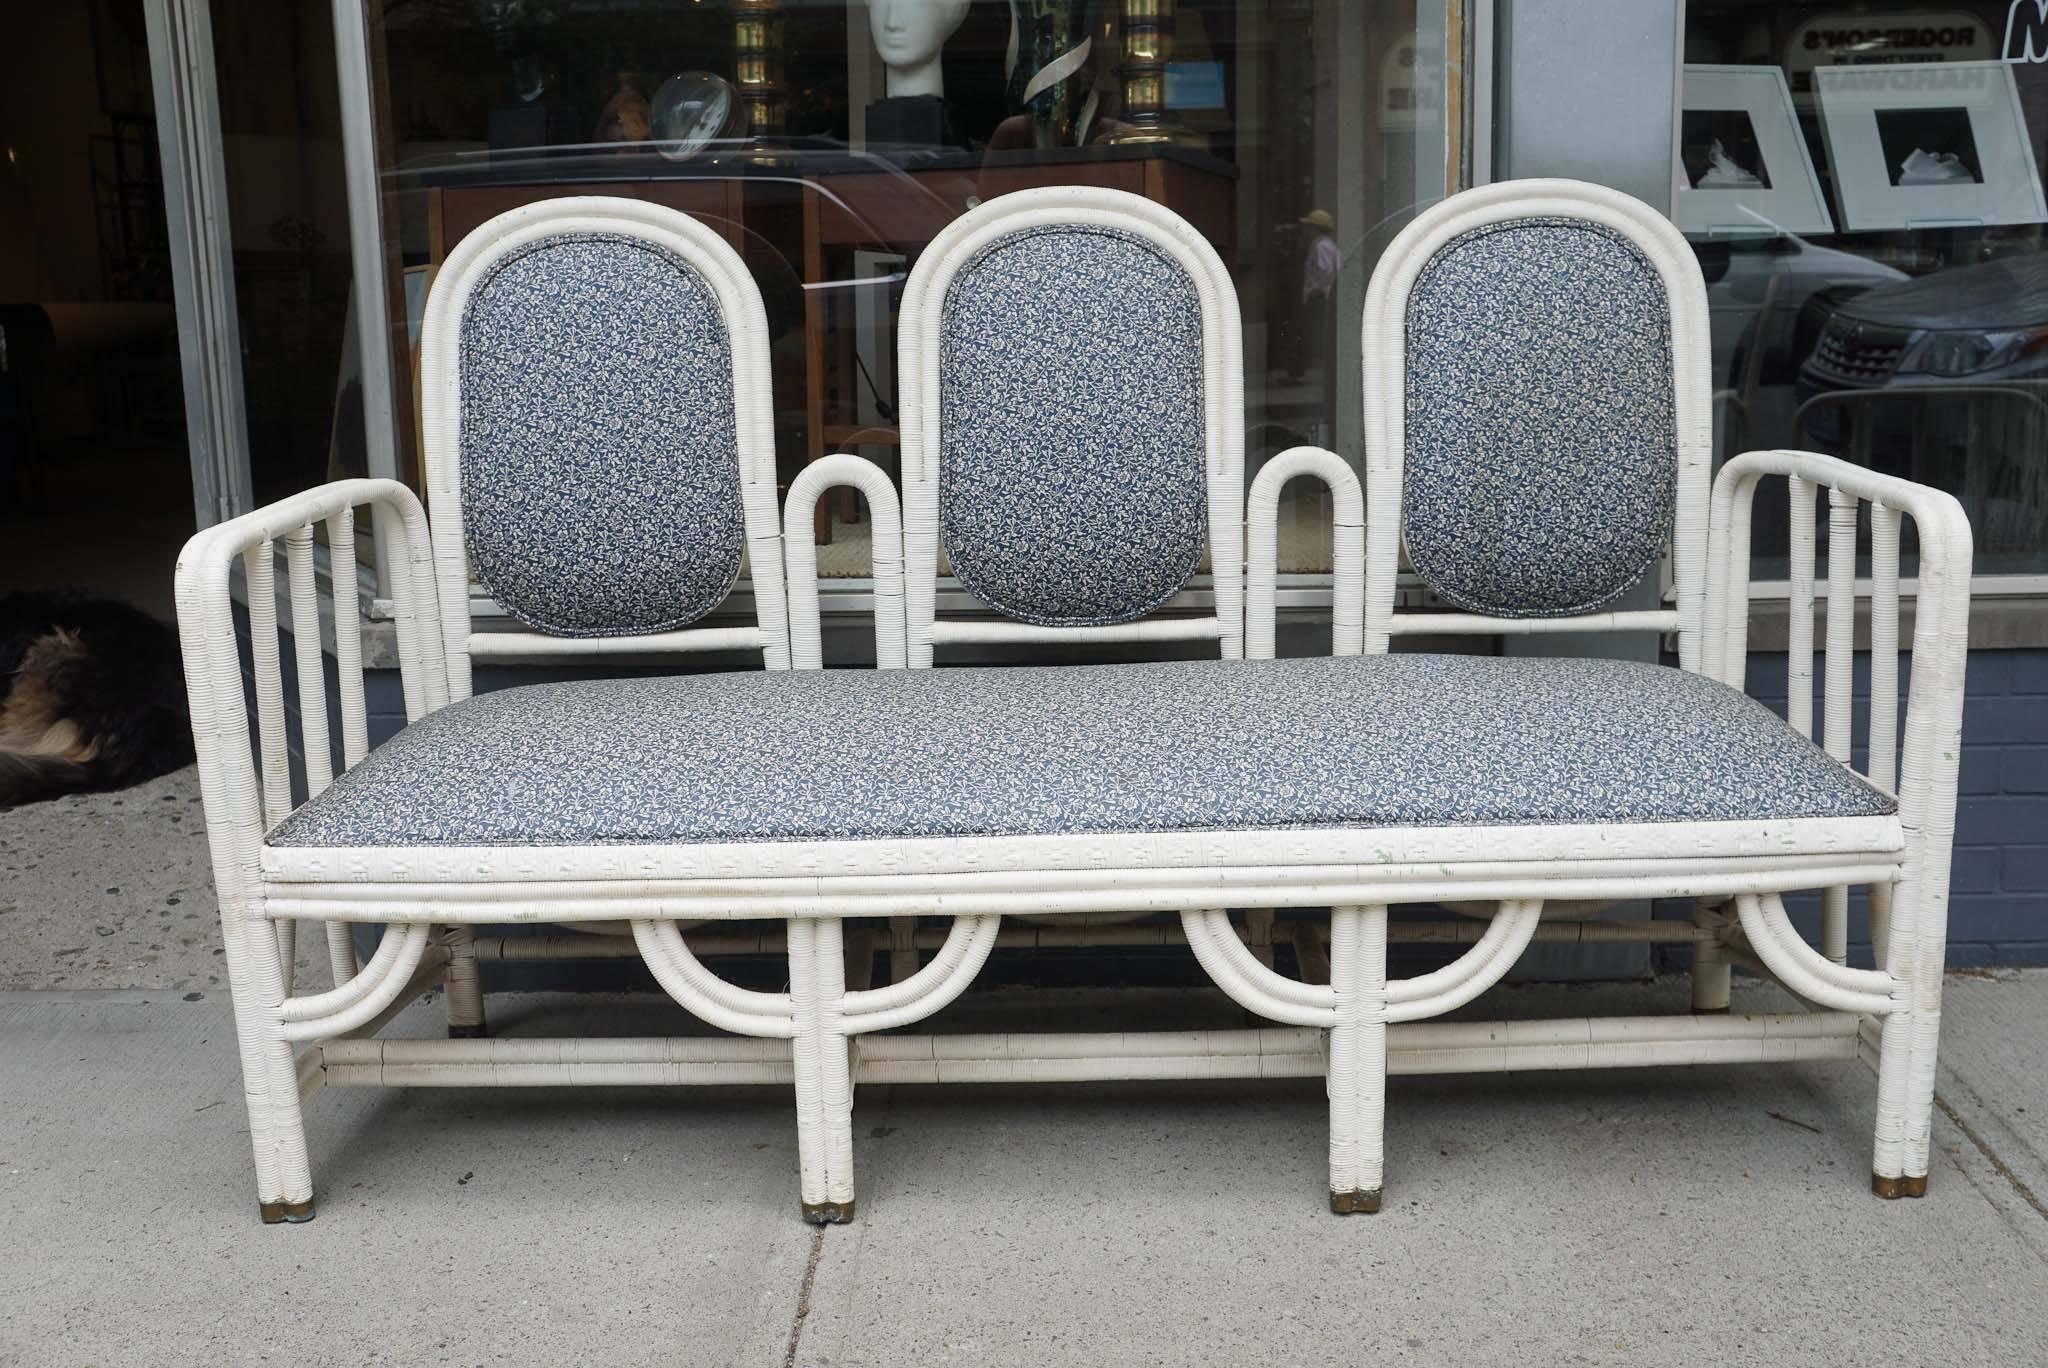 Here is a six-piece set of white wicker furniture with upholstered seats.
The set includes a sofa, two armchairs, two petite chairs and a table ottoman.
The pieces are in good vintage condition with slight wear and patina.
The measurements shown